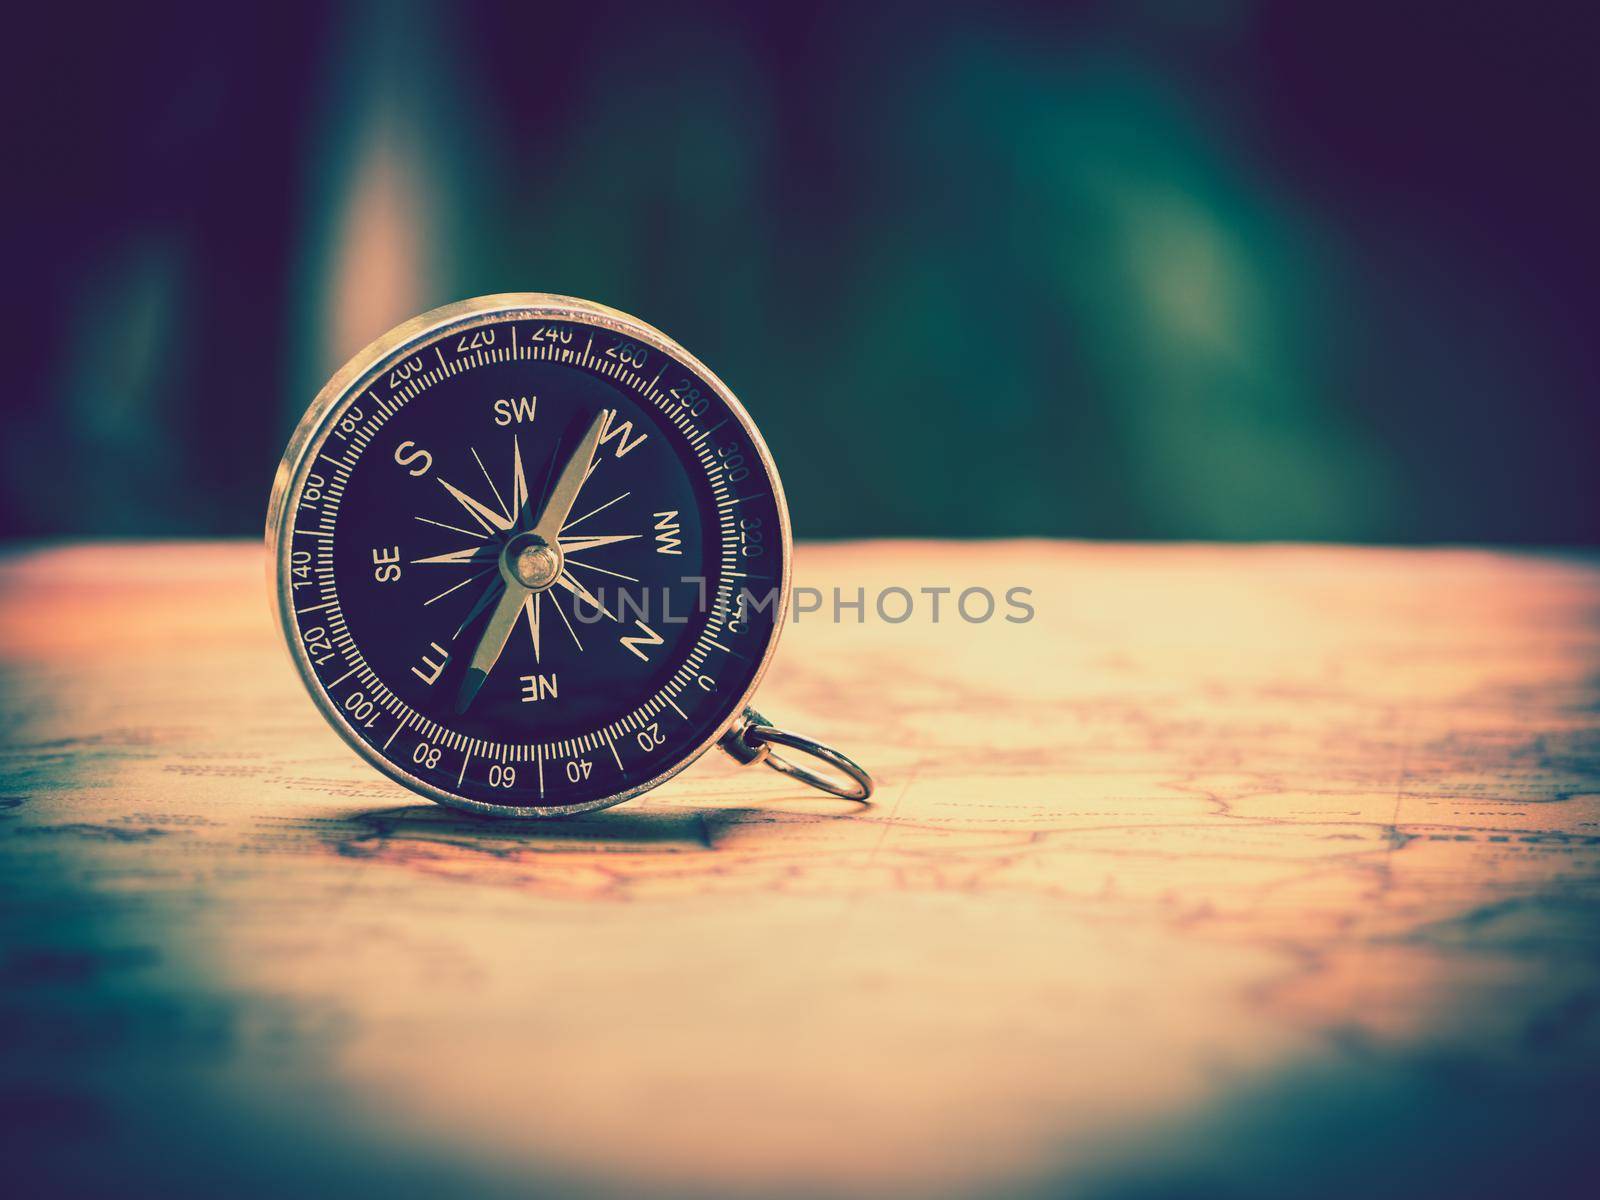 The compass is placed on the ancient or vintage world map . Travel geography navigation concept background. by Chakreeyarut